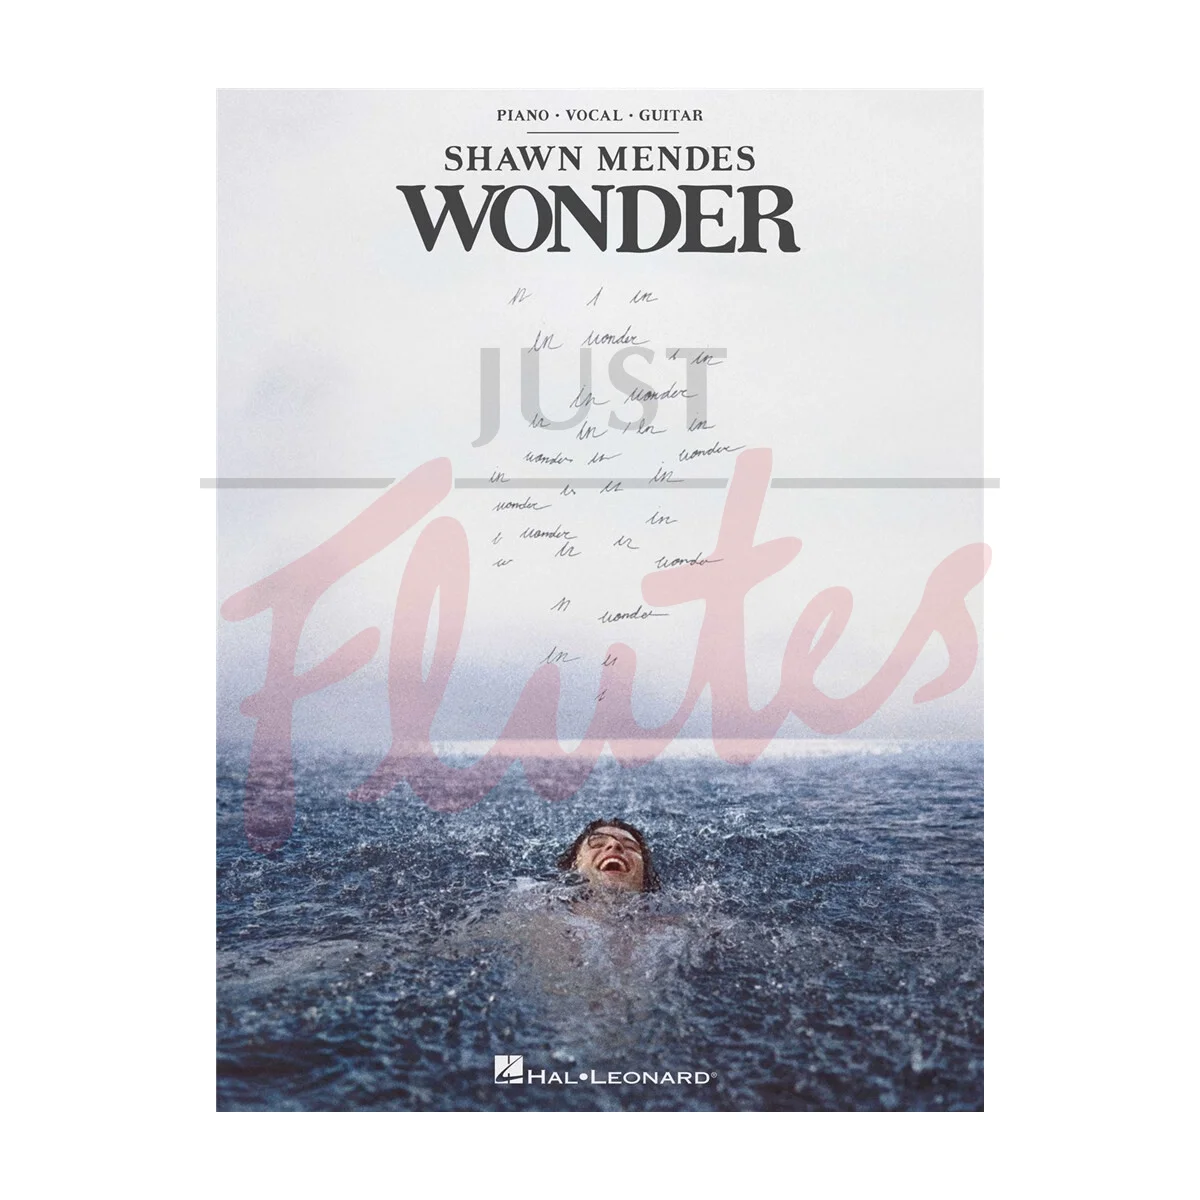 Wonder for Piano, Vocal and Guitar